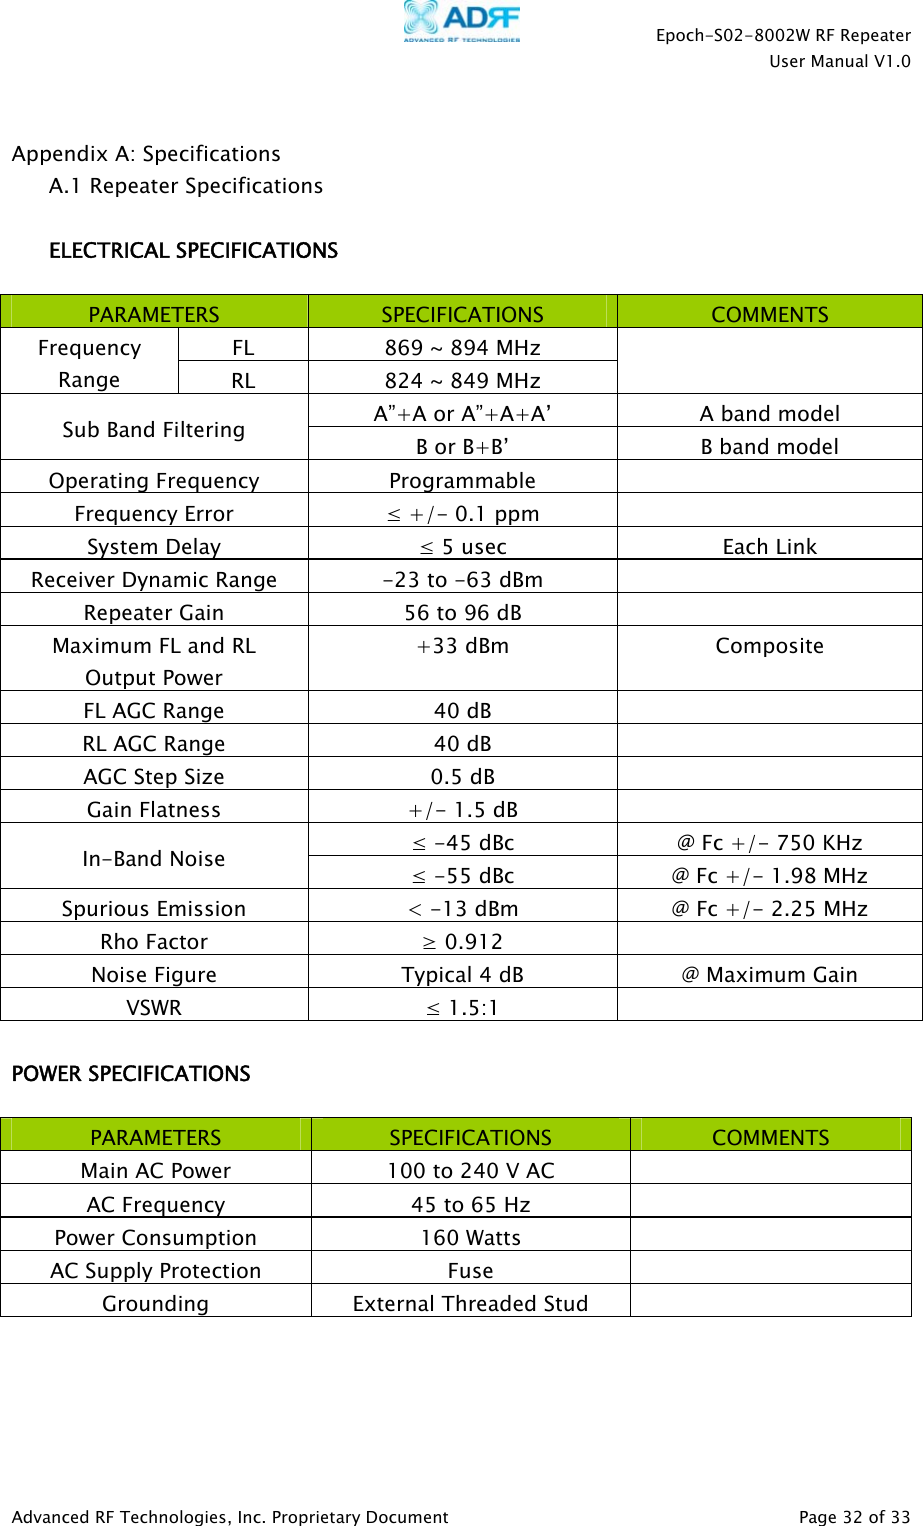    Epoch-S02-8002W RF Repeater  User Manual V1.0  Advanced RF Technologies, Inc. Proprietary Document   Page 32 of 33   Appendix A: Specifications A.1 Repeater Specifications  ELECTRICAL SPECIFICATIONS  PARAMETERS  SPECIFICATIONS  COMMENTS FL  869 ~ 894 MHz Frequency Range  RL  824 ~ 849 MHz  A”+A or A”+A+A’  A band model Sub Band Filtering  B or B+B’  B band model Operating Frequency  Programmable   Frequency Error  ≤ +/- 0.1 ppm   System Delay  ≤ 5 usec  Each Link Receiver Dynamic Range  -23 to -63 dBm   Repeater Gain  56 to 96 dB   Maximum FL and RL  Output Power +33 dBm  Composite FL AGC Range  40 dB   RL AGC Range  40 dB   AGC Step Size  0.5 dB   Gain Flatness  +/- 1.5 dB   ≤ -45 dBc  @ Fc +/- 750 KHz In-Band Noise  ≤ -55 dBc  @ Fc +/- 1.98 MHz Spurious Emission  &lt; -13 dBm  @ Fc +/- 2.25 MHz Rho Factor  ≥ 0.912   Noise Figure  Typical 4 dB  @ Maximum Gain VSWR  ≤ 1.5:1    POWER SPECIFICATIONS  PARAMETERS  SPECIFICATIONS  COMMENTS Main AC Power  100 to 240 V AC   AC Frequency  45 to 65 Hz   Power Consumption  160 Watts   AC Supply Protection  Fuse   Grounding  External Threaded Stud      